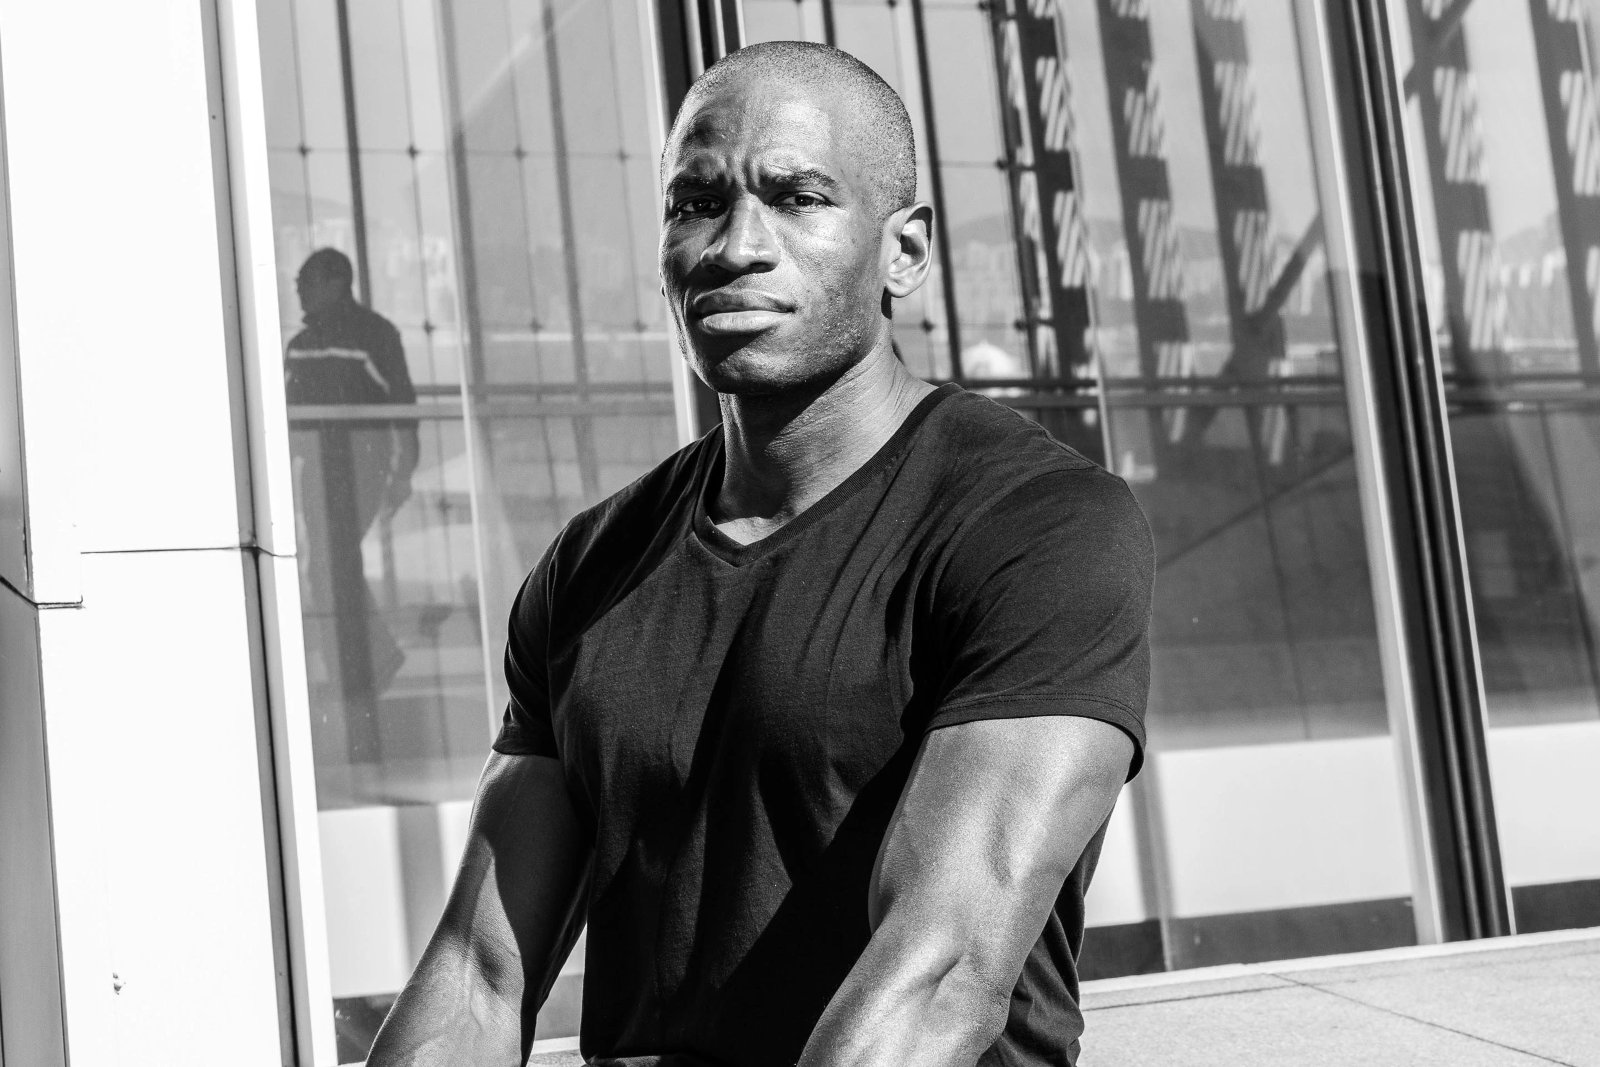 Bitmex's Arthur Hayes Requests Leniency, No Jail Time for Violating the US Bank Secrecy Act 11